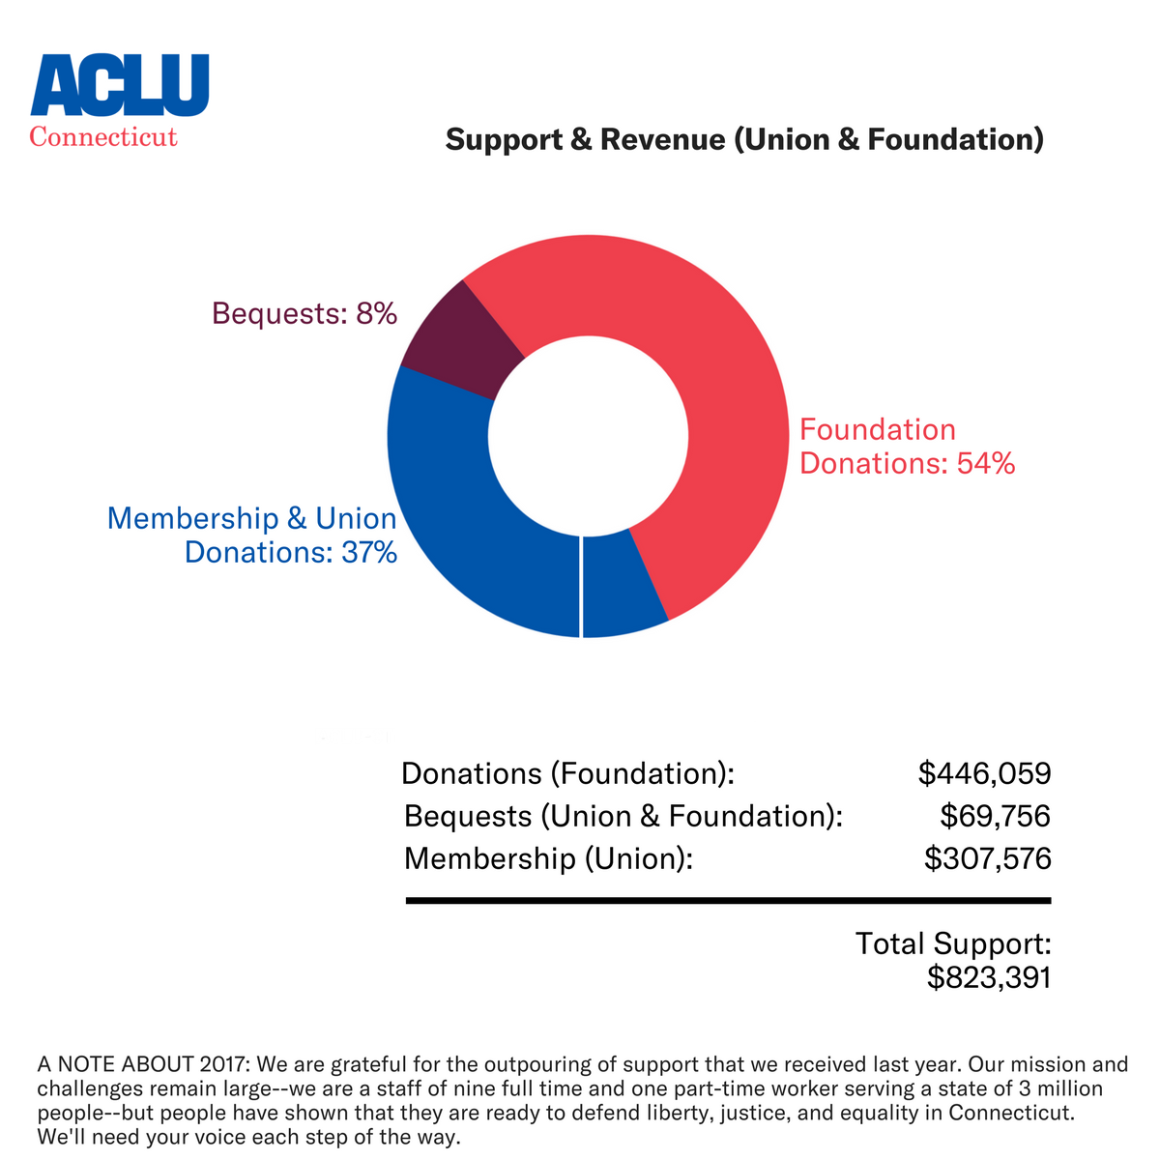 Support and revenue for the ACLU-CT in 2017